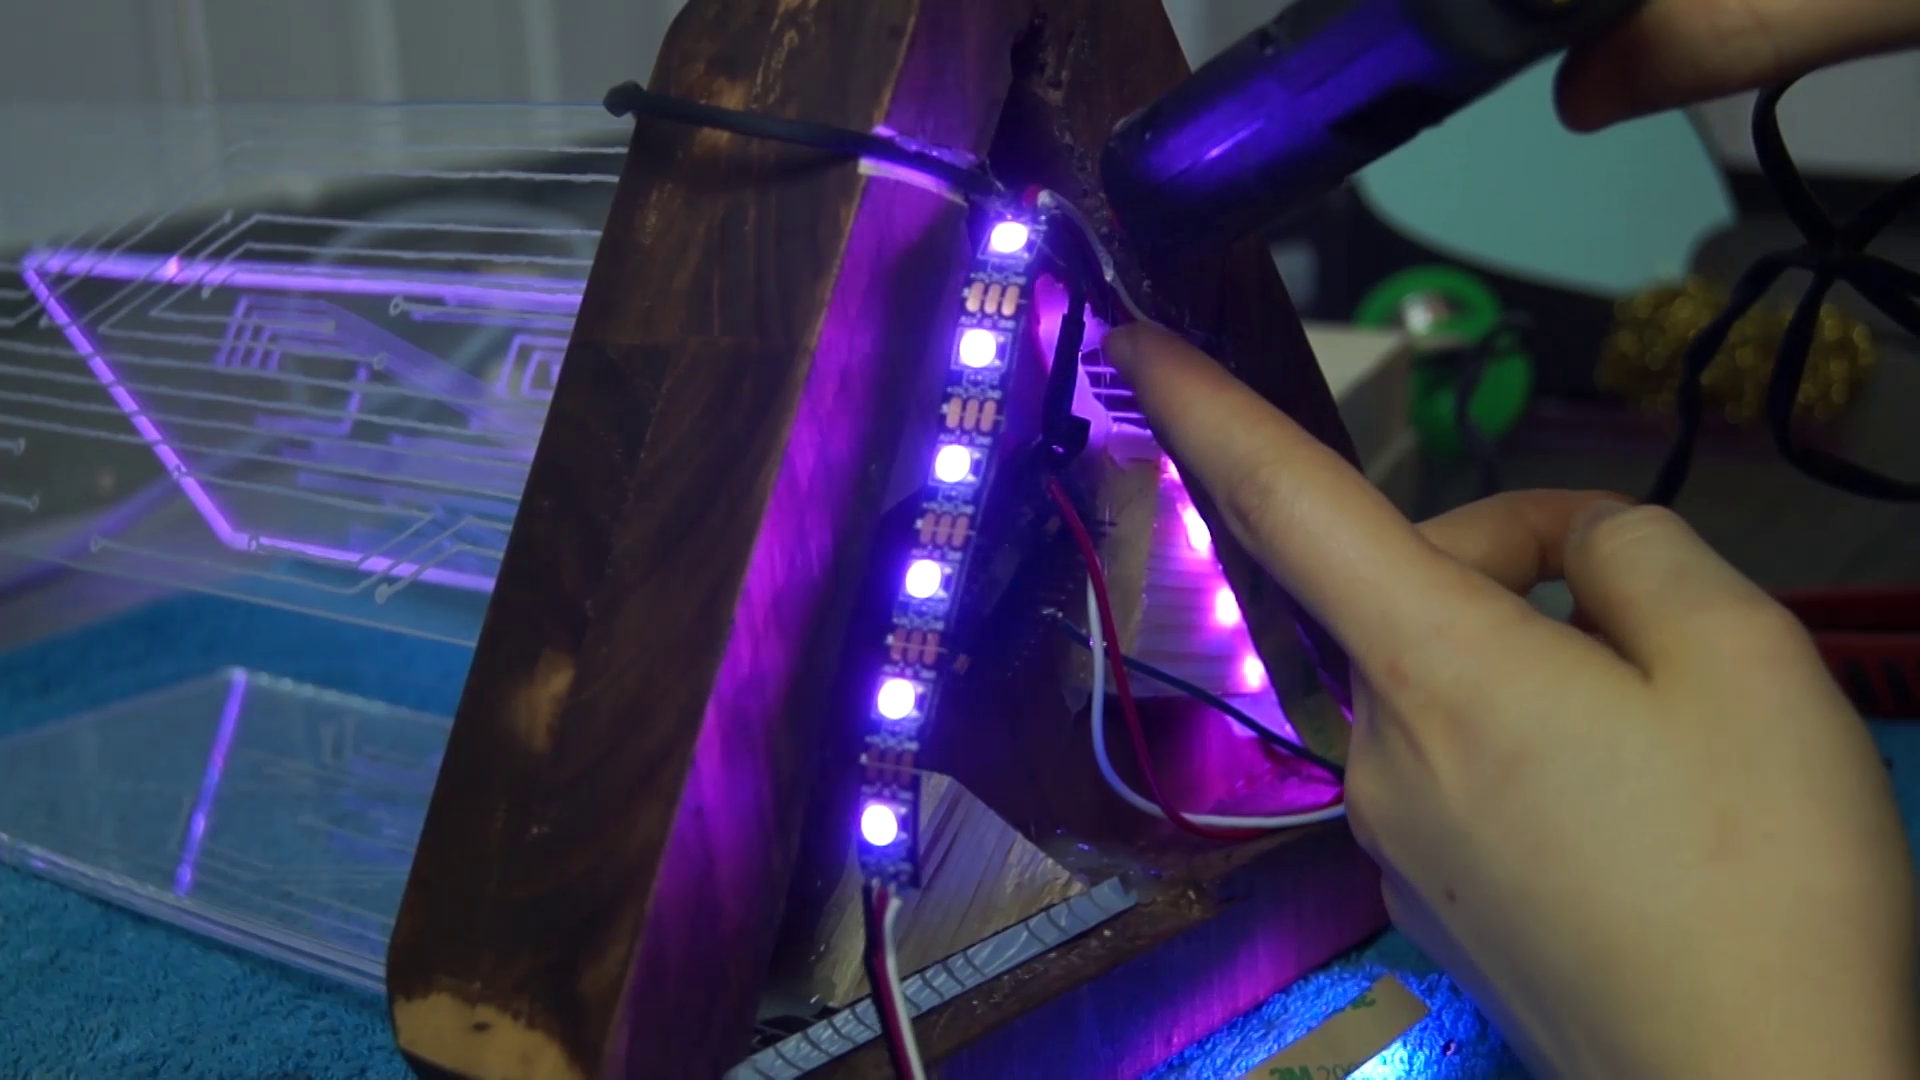 acrylic-led-lamp-pcb-inspired-colour-changing-rgb-2016-11-26-17h42m54s481.png